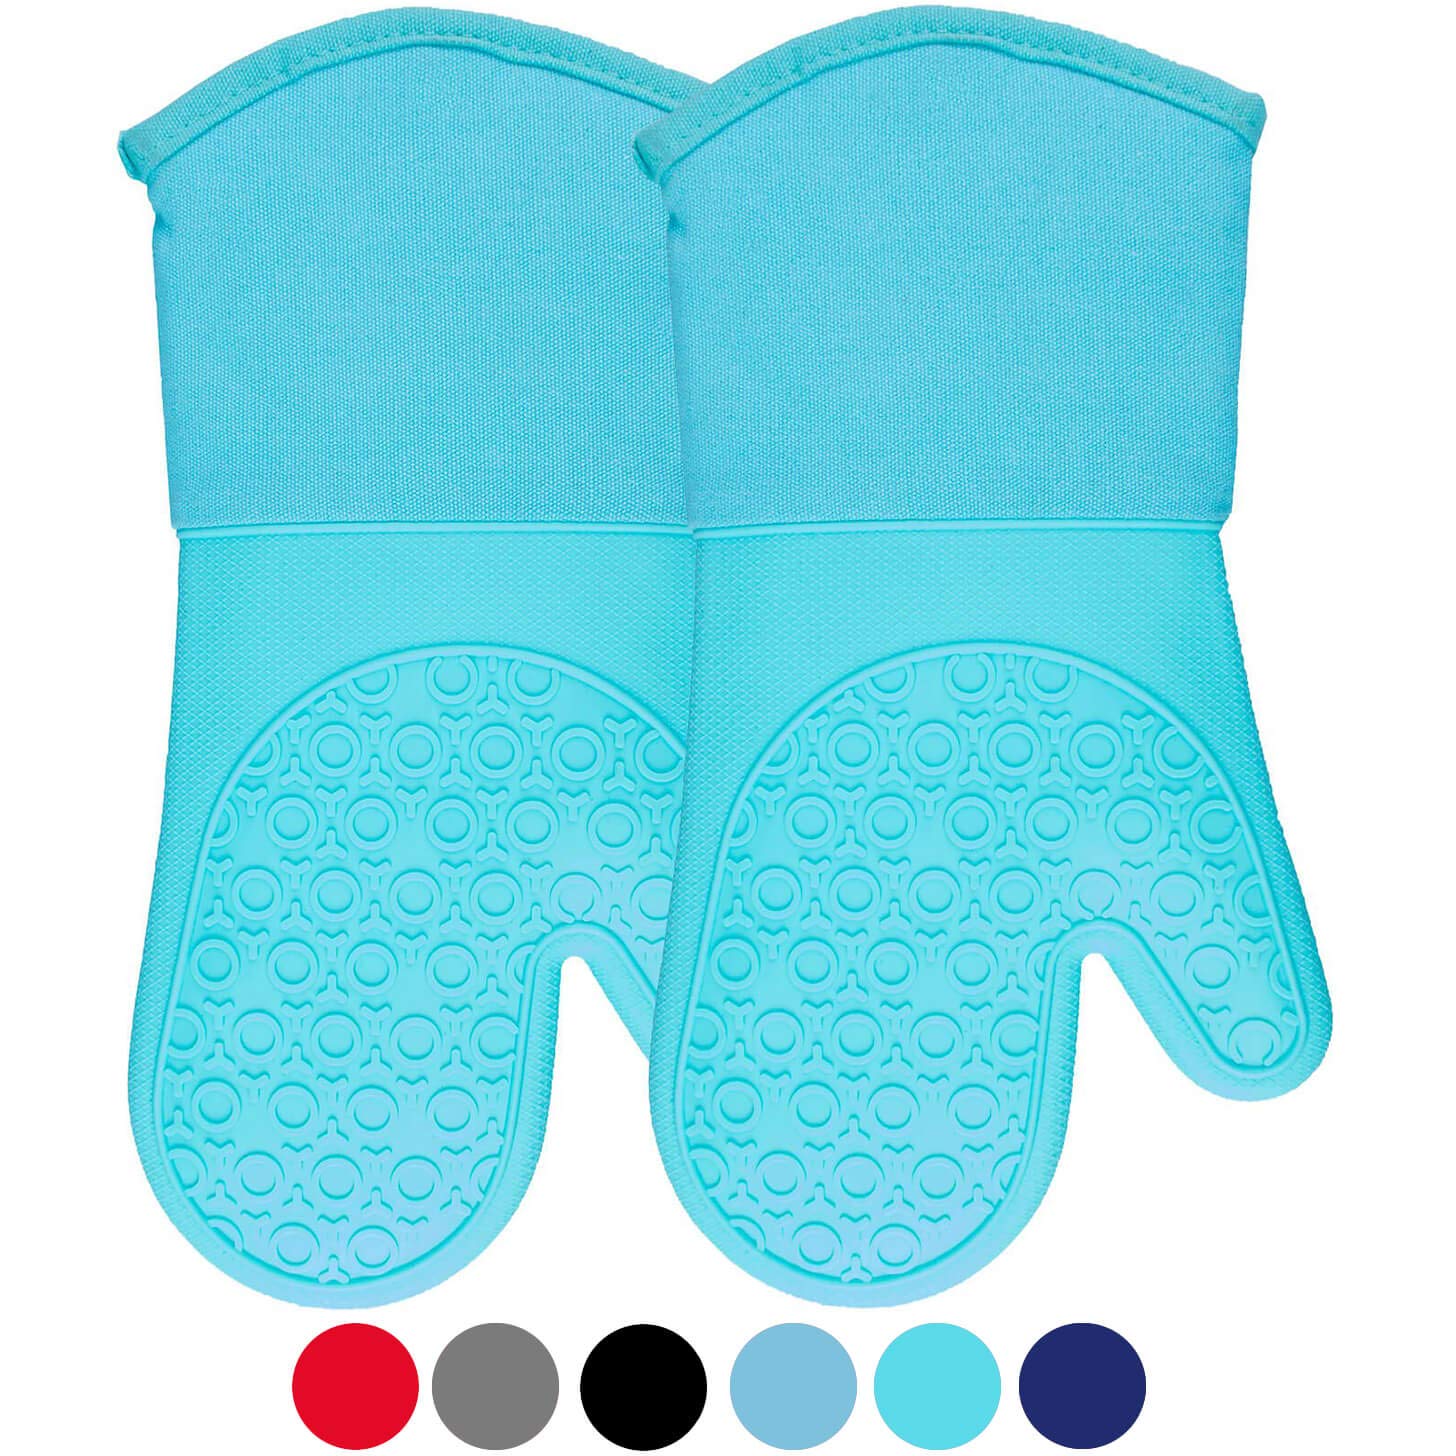 Silicone Oven Mitts with Quilted Cotton Lining - Professional Heat Resistant Kitchen Pot Holders - 1 Pair (Turquoise - 13.7 Inch Long, Oven Mitts)